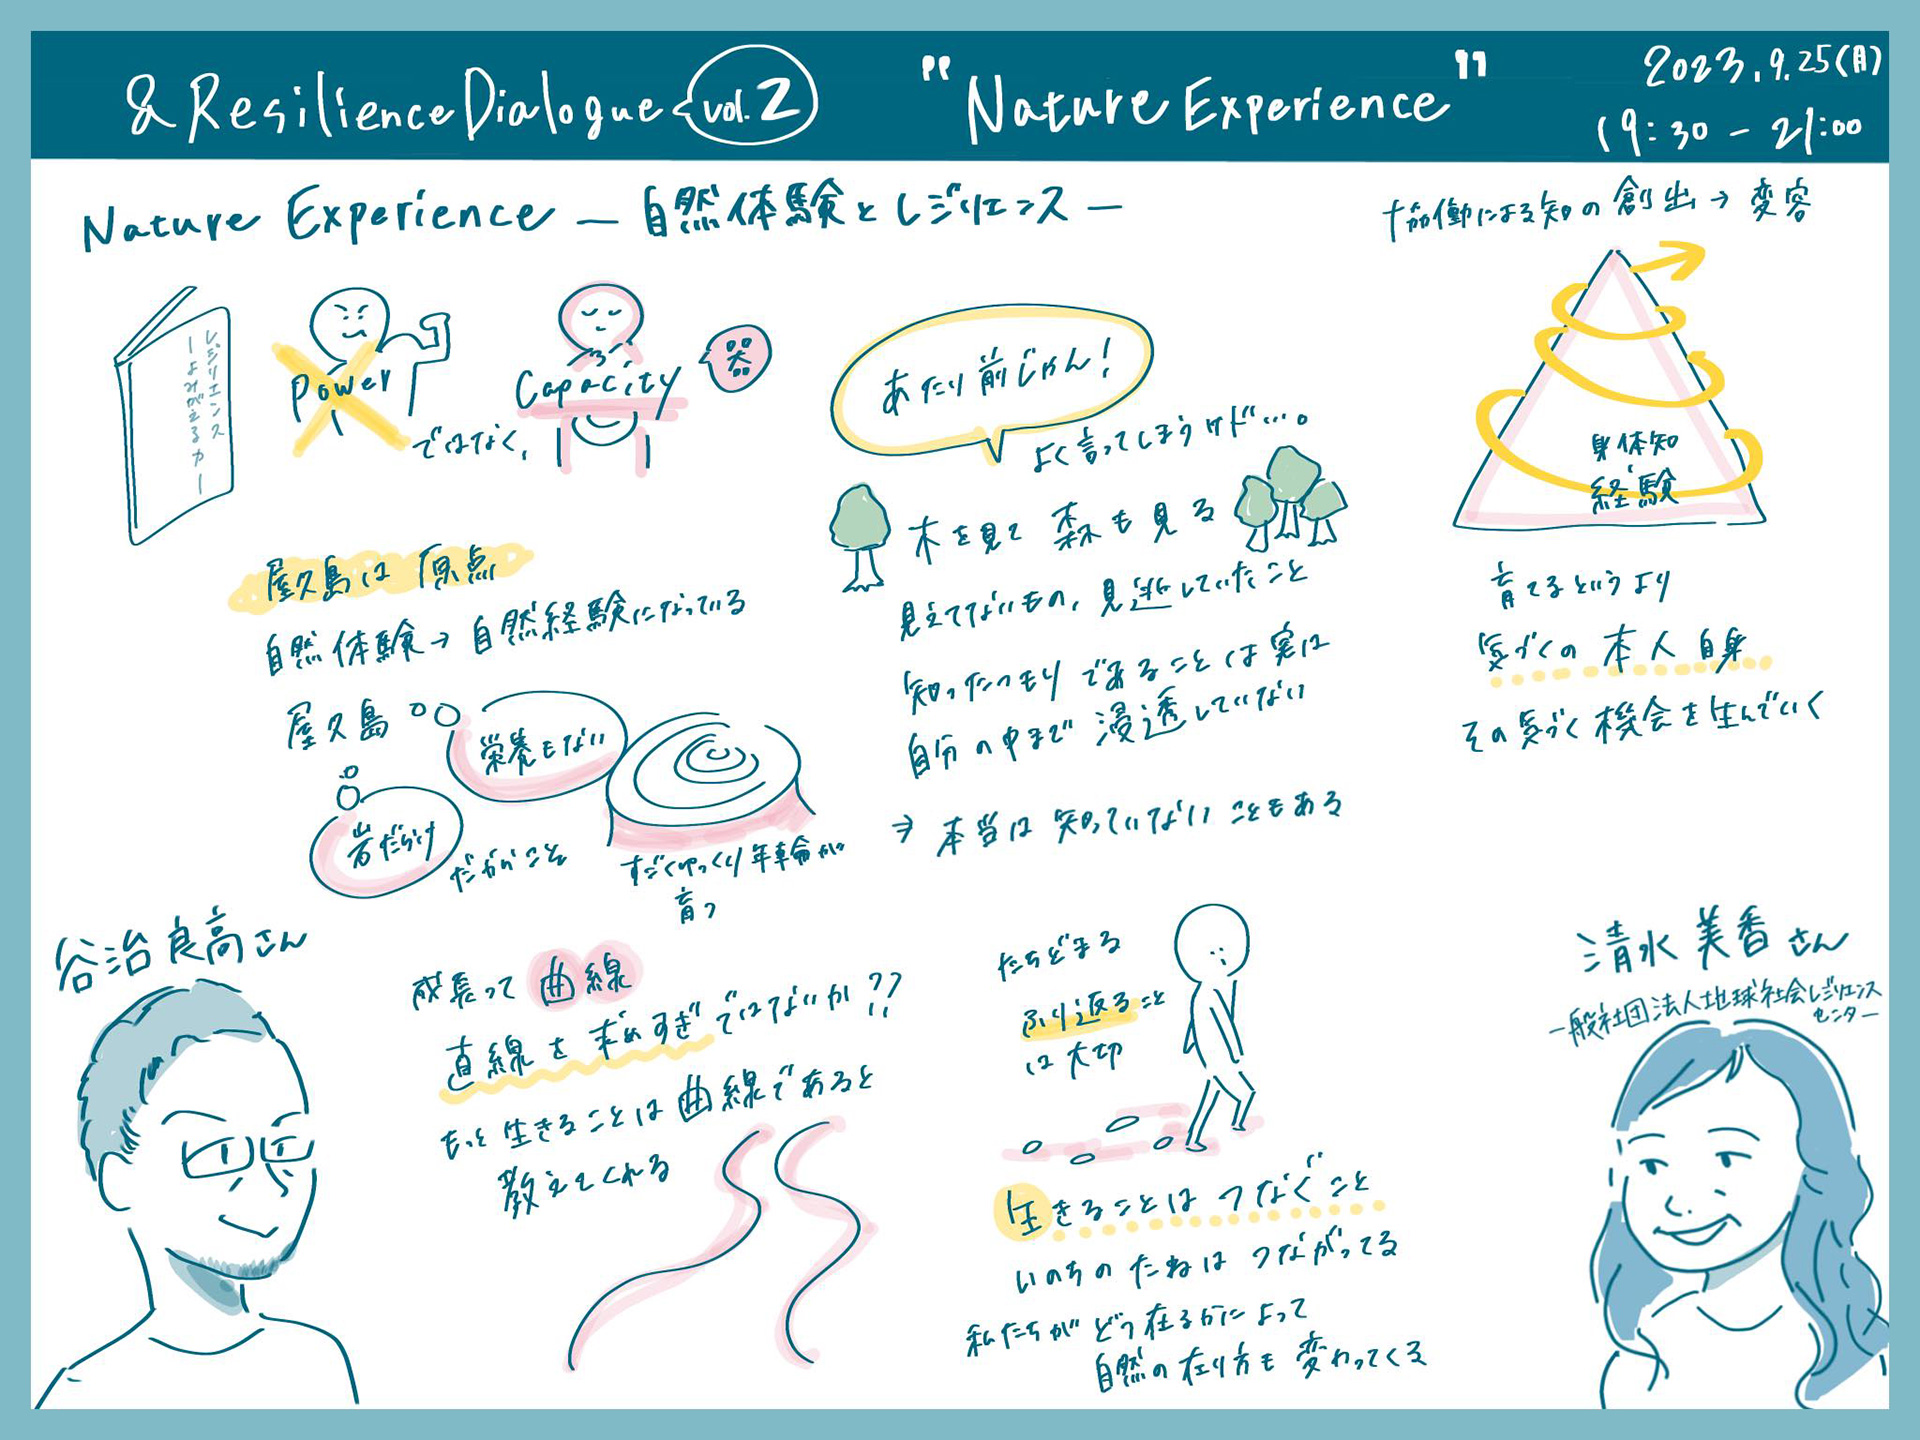 & Resilience Dialogue Vol.02 "Nature Experience"